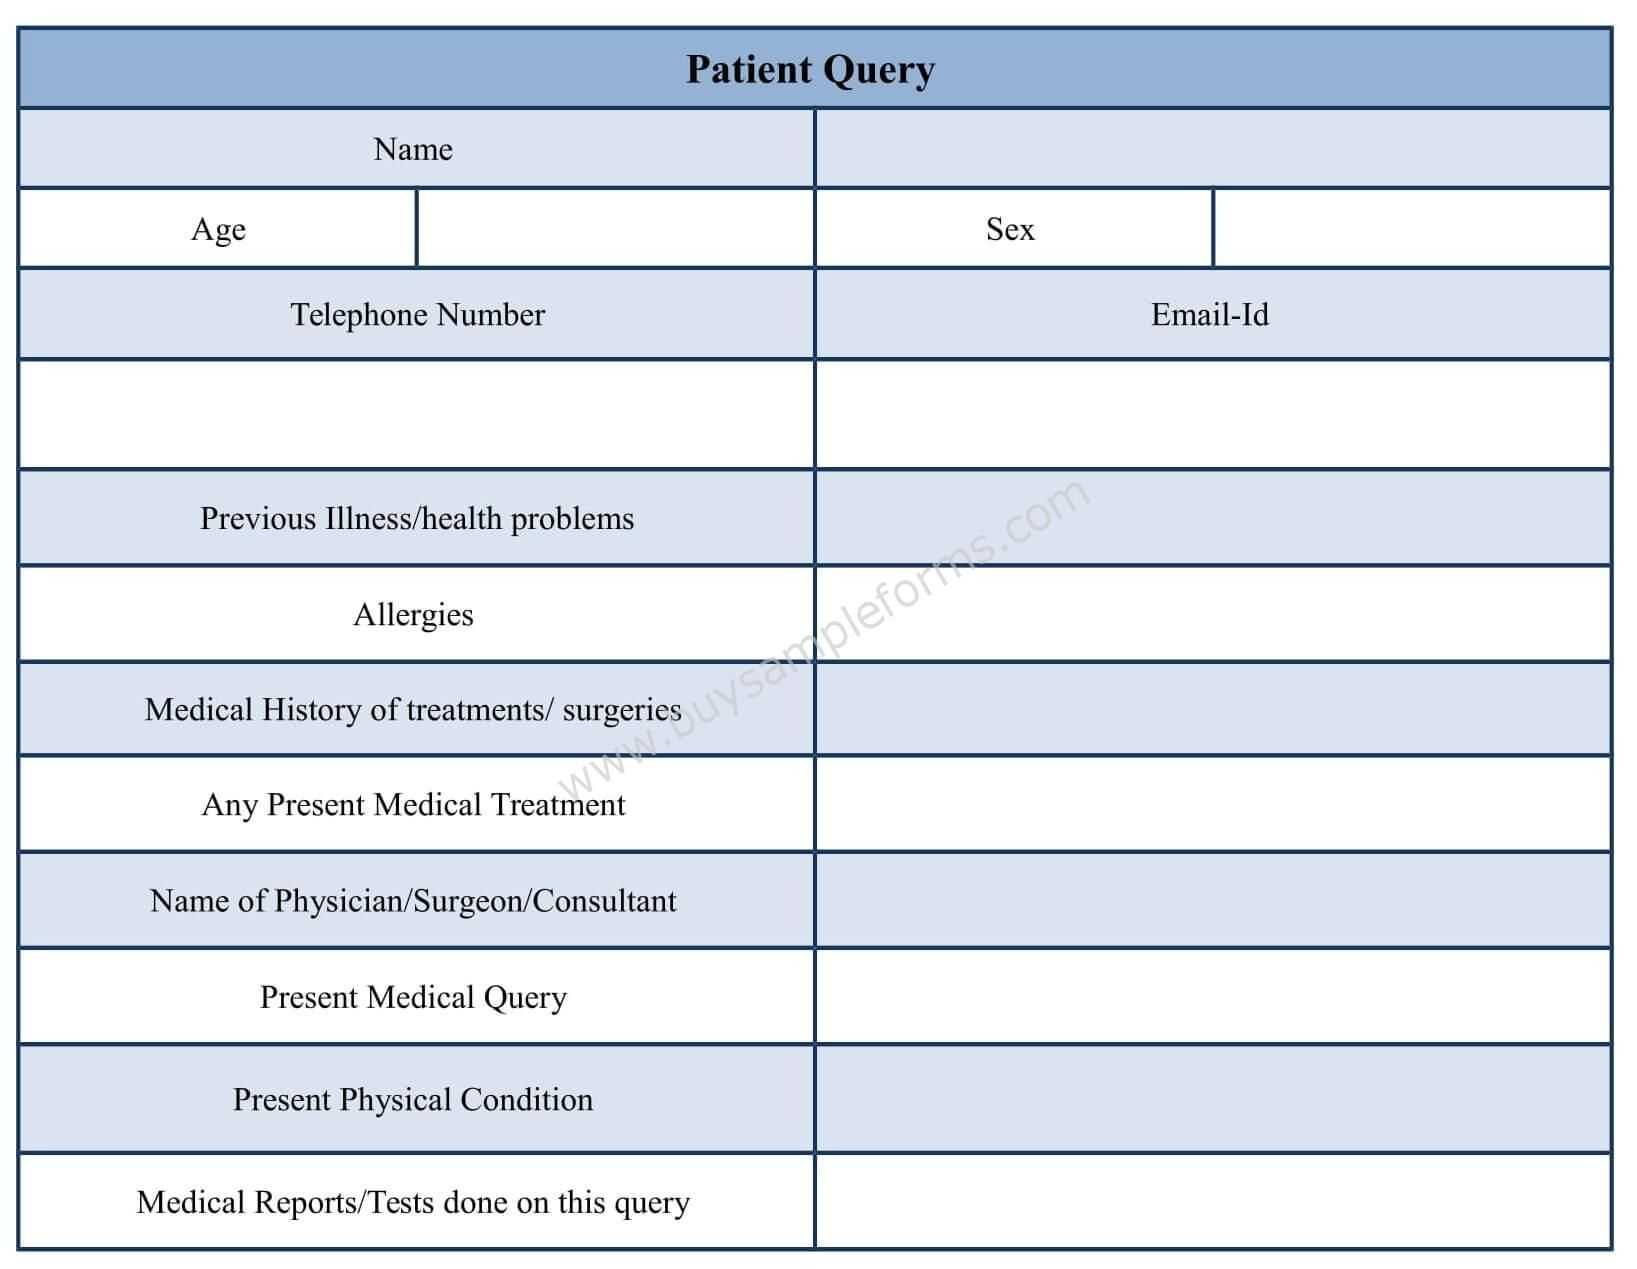 Patient Query Form Template In Word Format | Sample Query Intended For Medical History Template Word